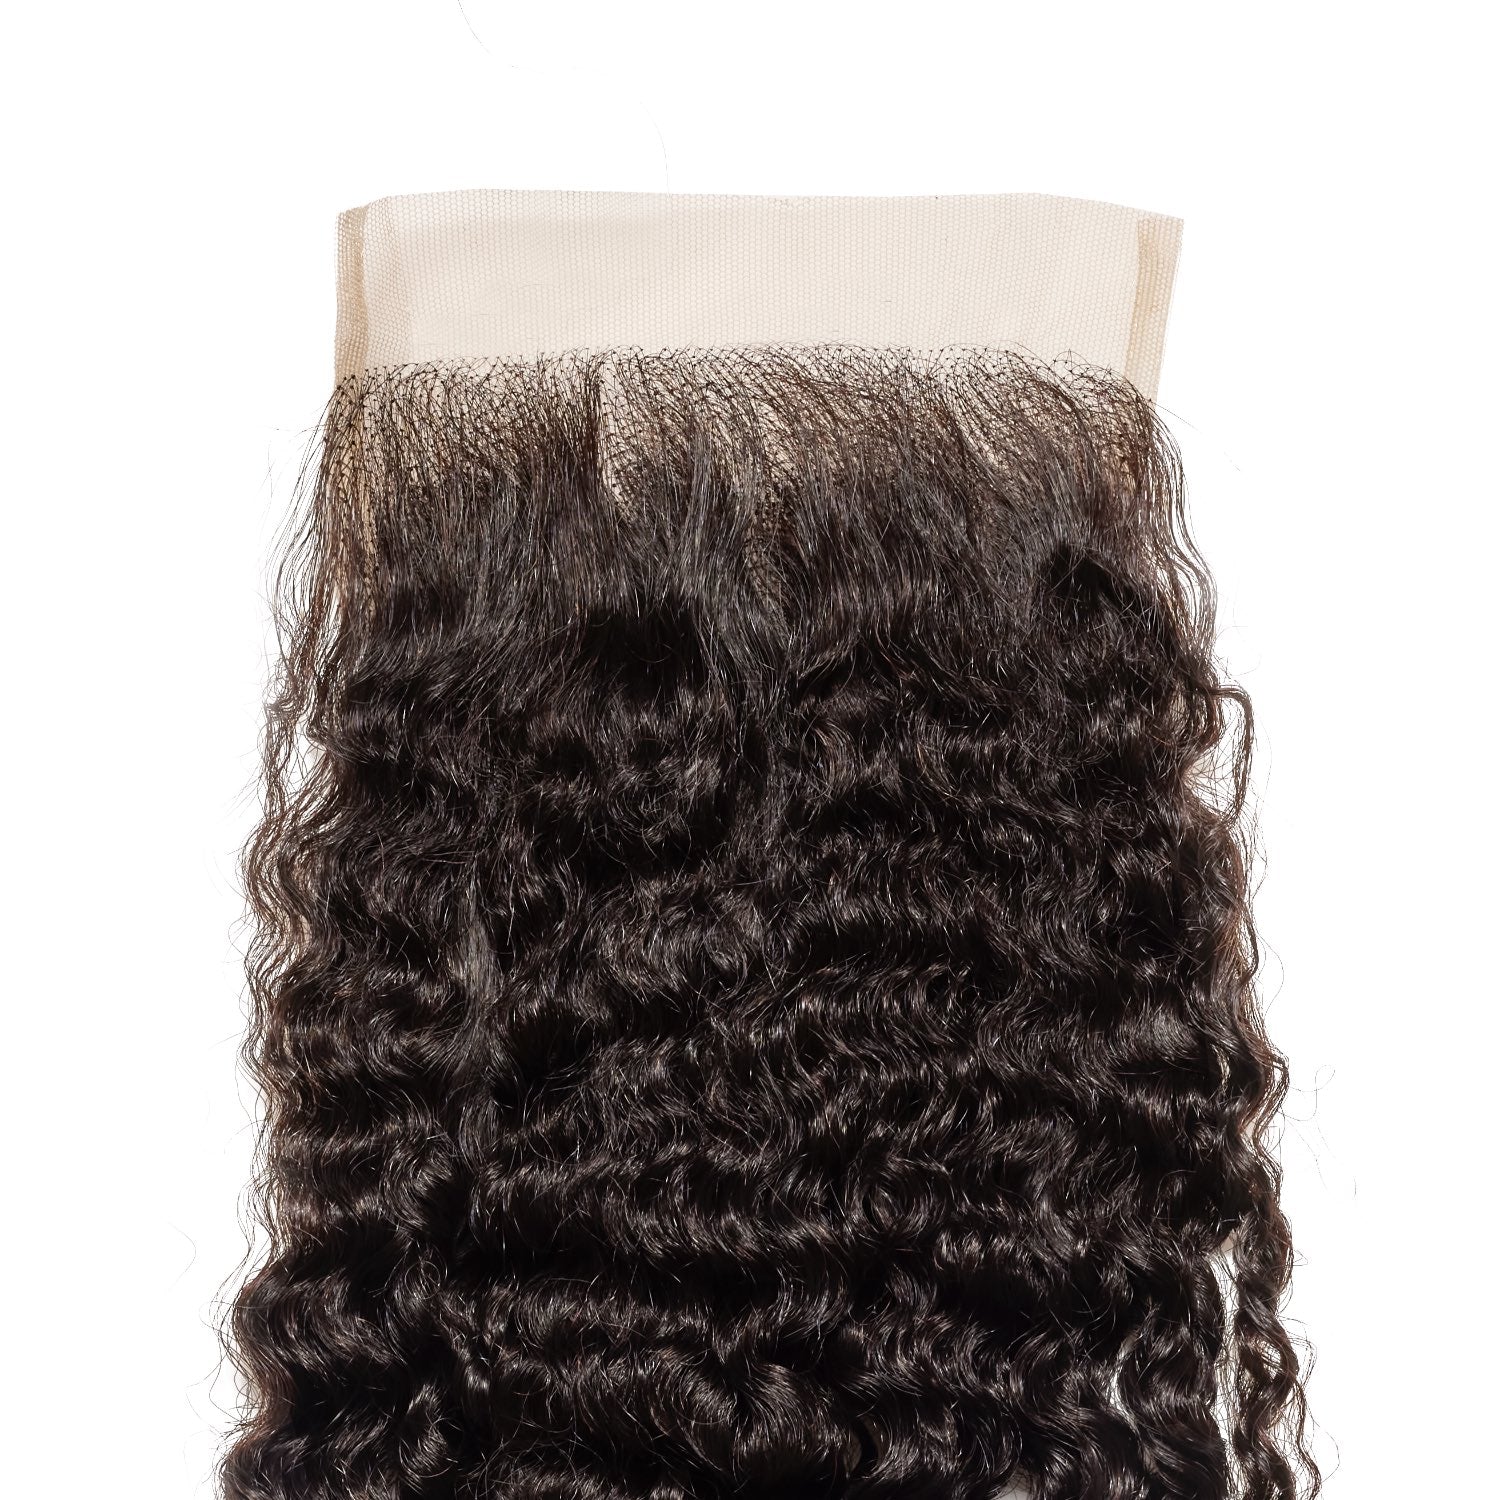 Cambodian 3c Curly Closure - Glamour House Of Hair 